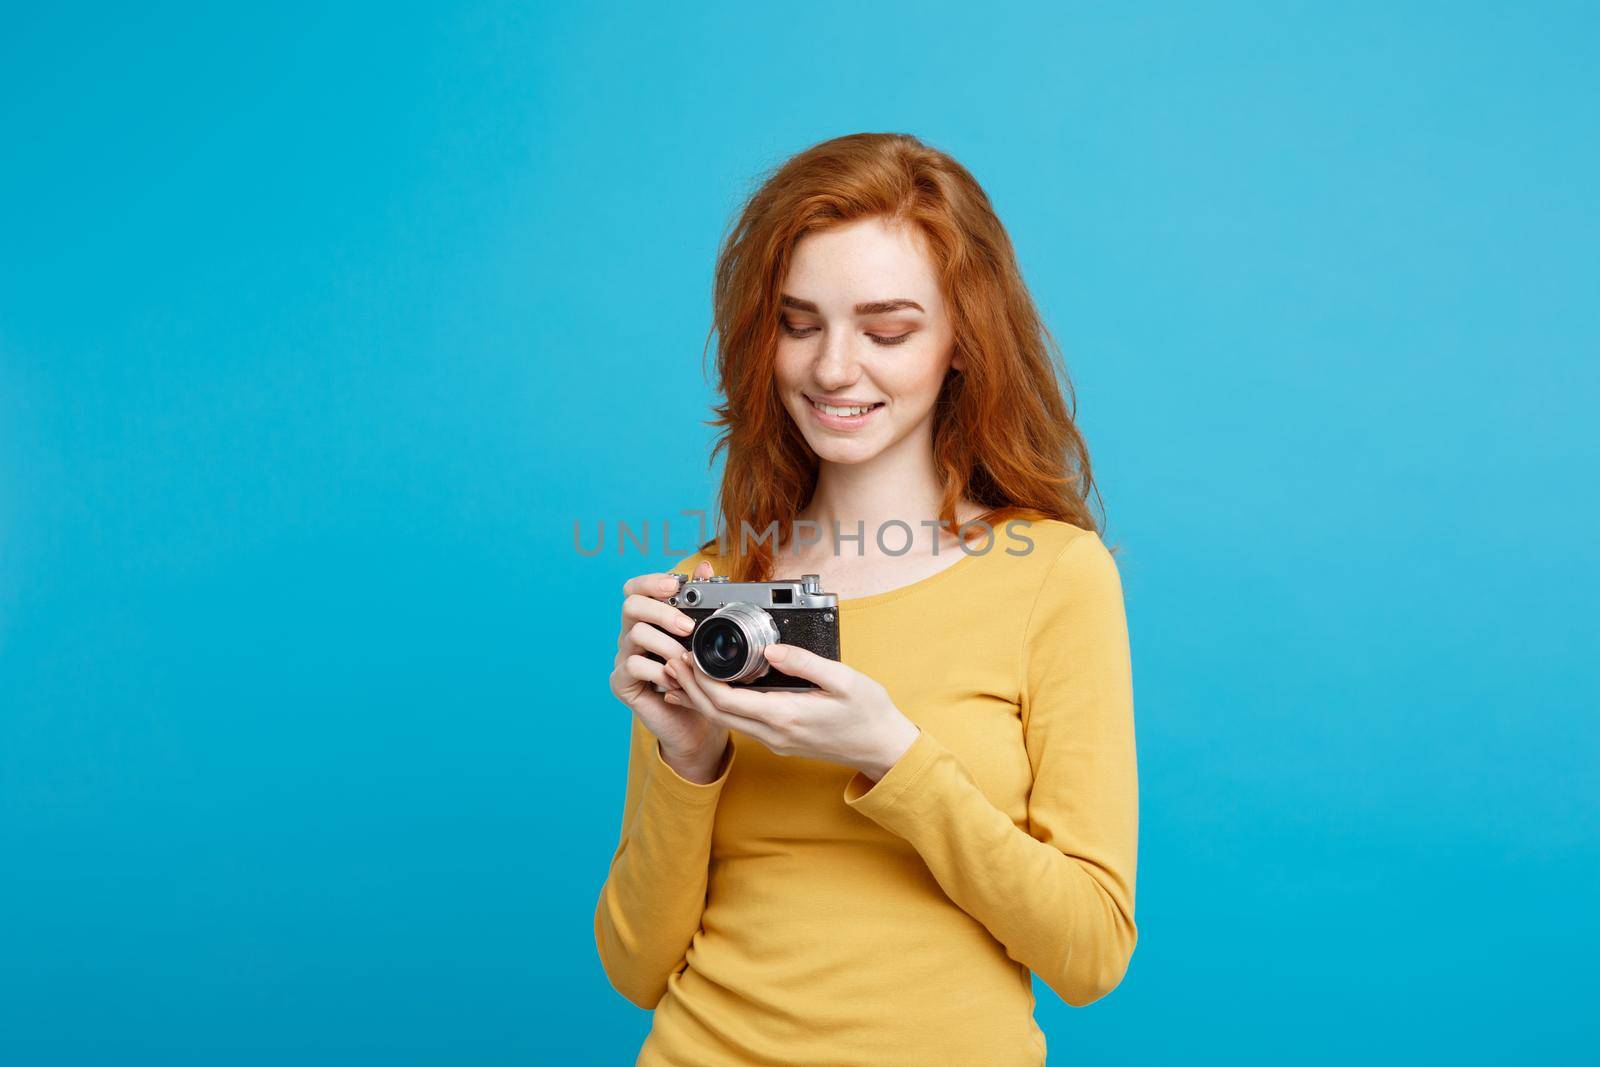 Travel and People Concept - Headshot Portrait of happy ginger red hair girl with playing with vintage camera in happy expression. Pastel blue background. Copy Space.